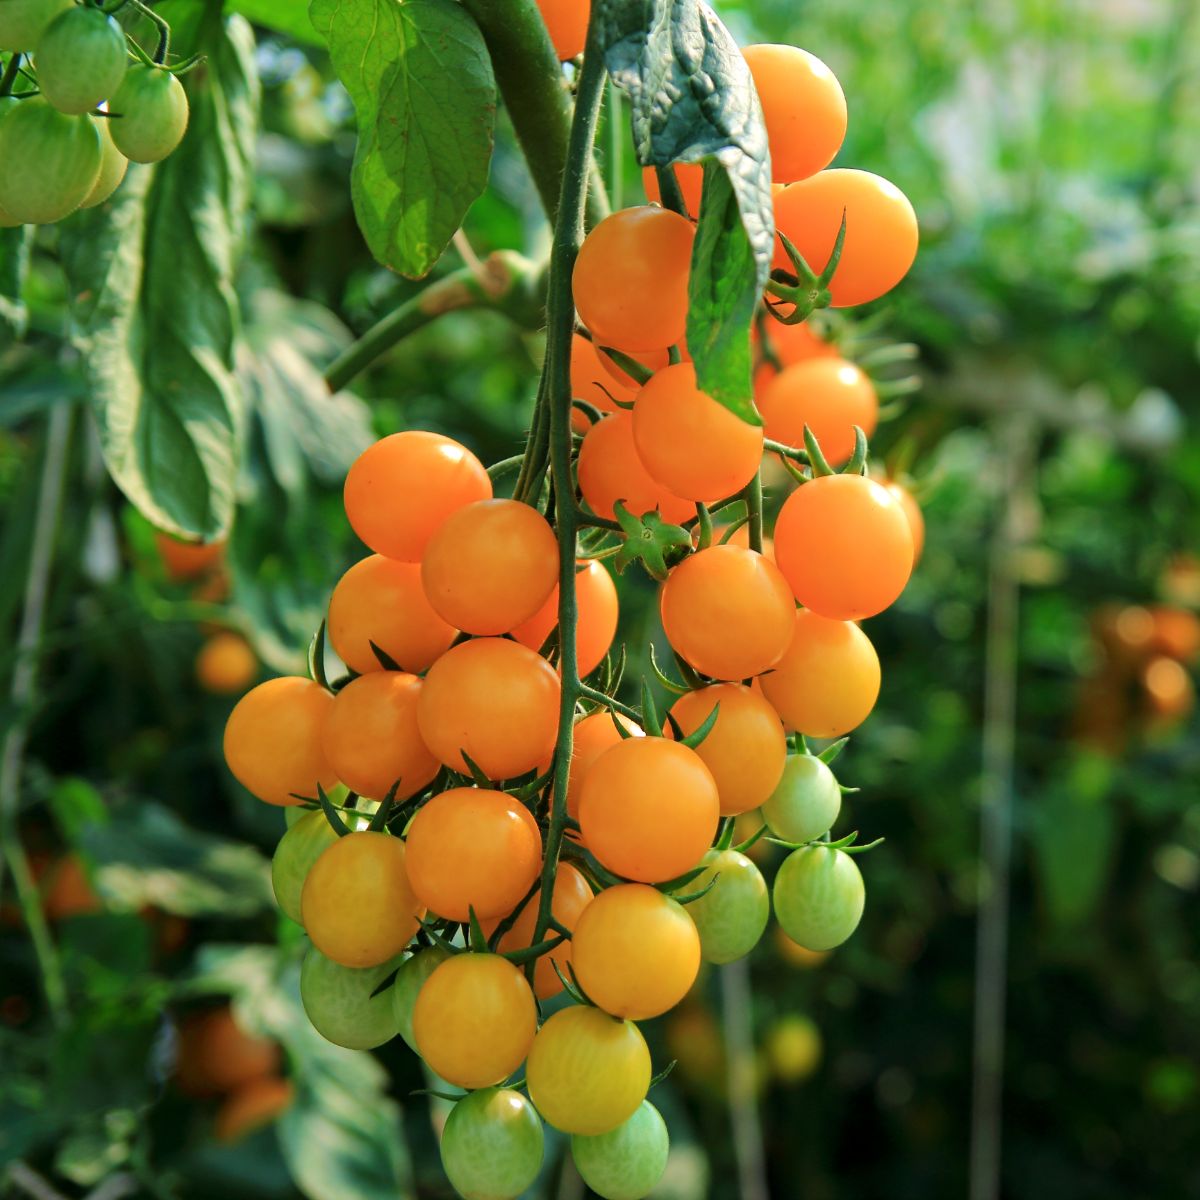 Yellow clusters of ripe Esterina cherry tomatoes